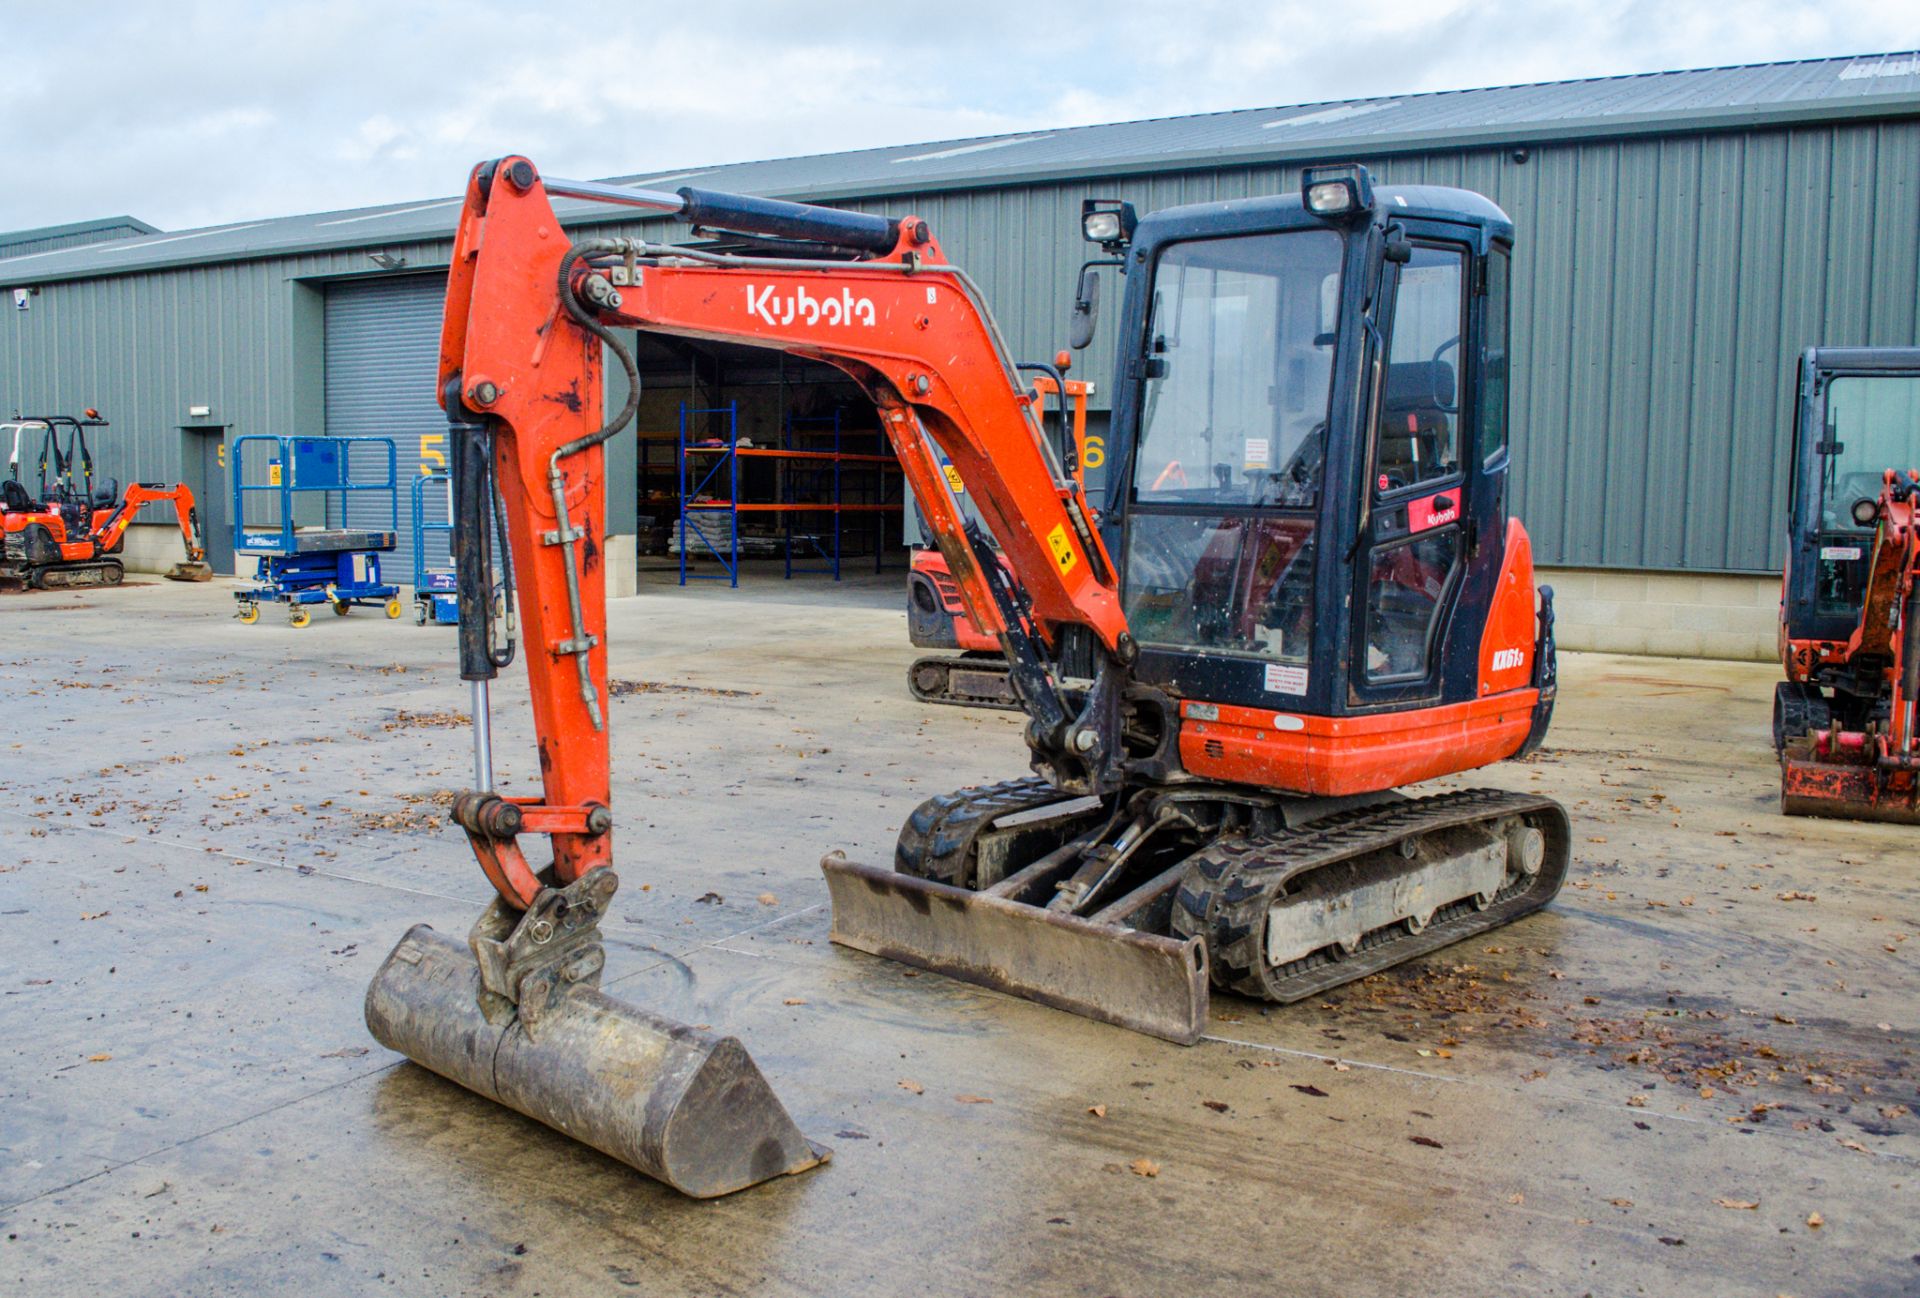 Kubota KX61-3 2.6 tonne rubber tracked excavator Year: 2015 S/N: 81787 Recorded Hours: 2860 EXC149